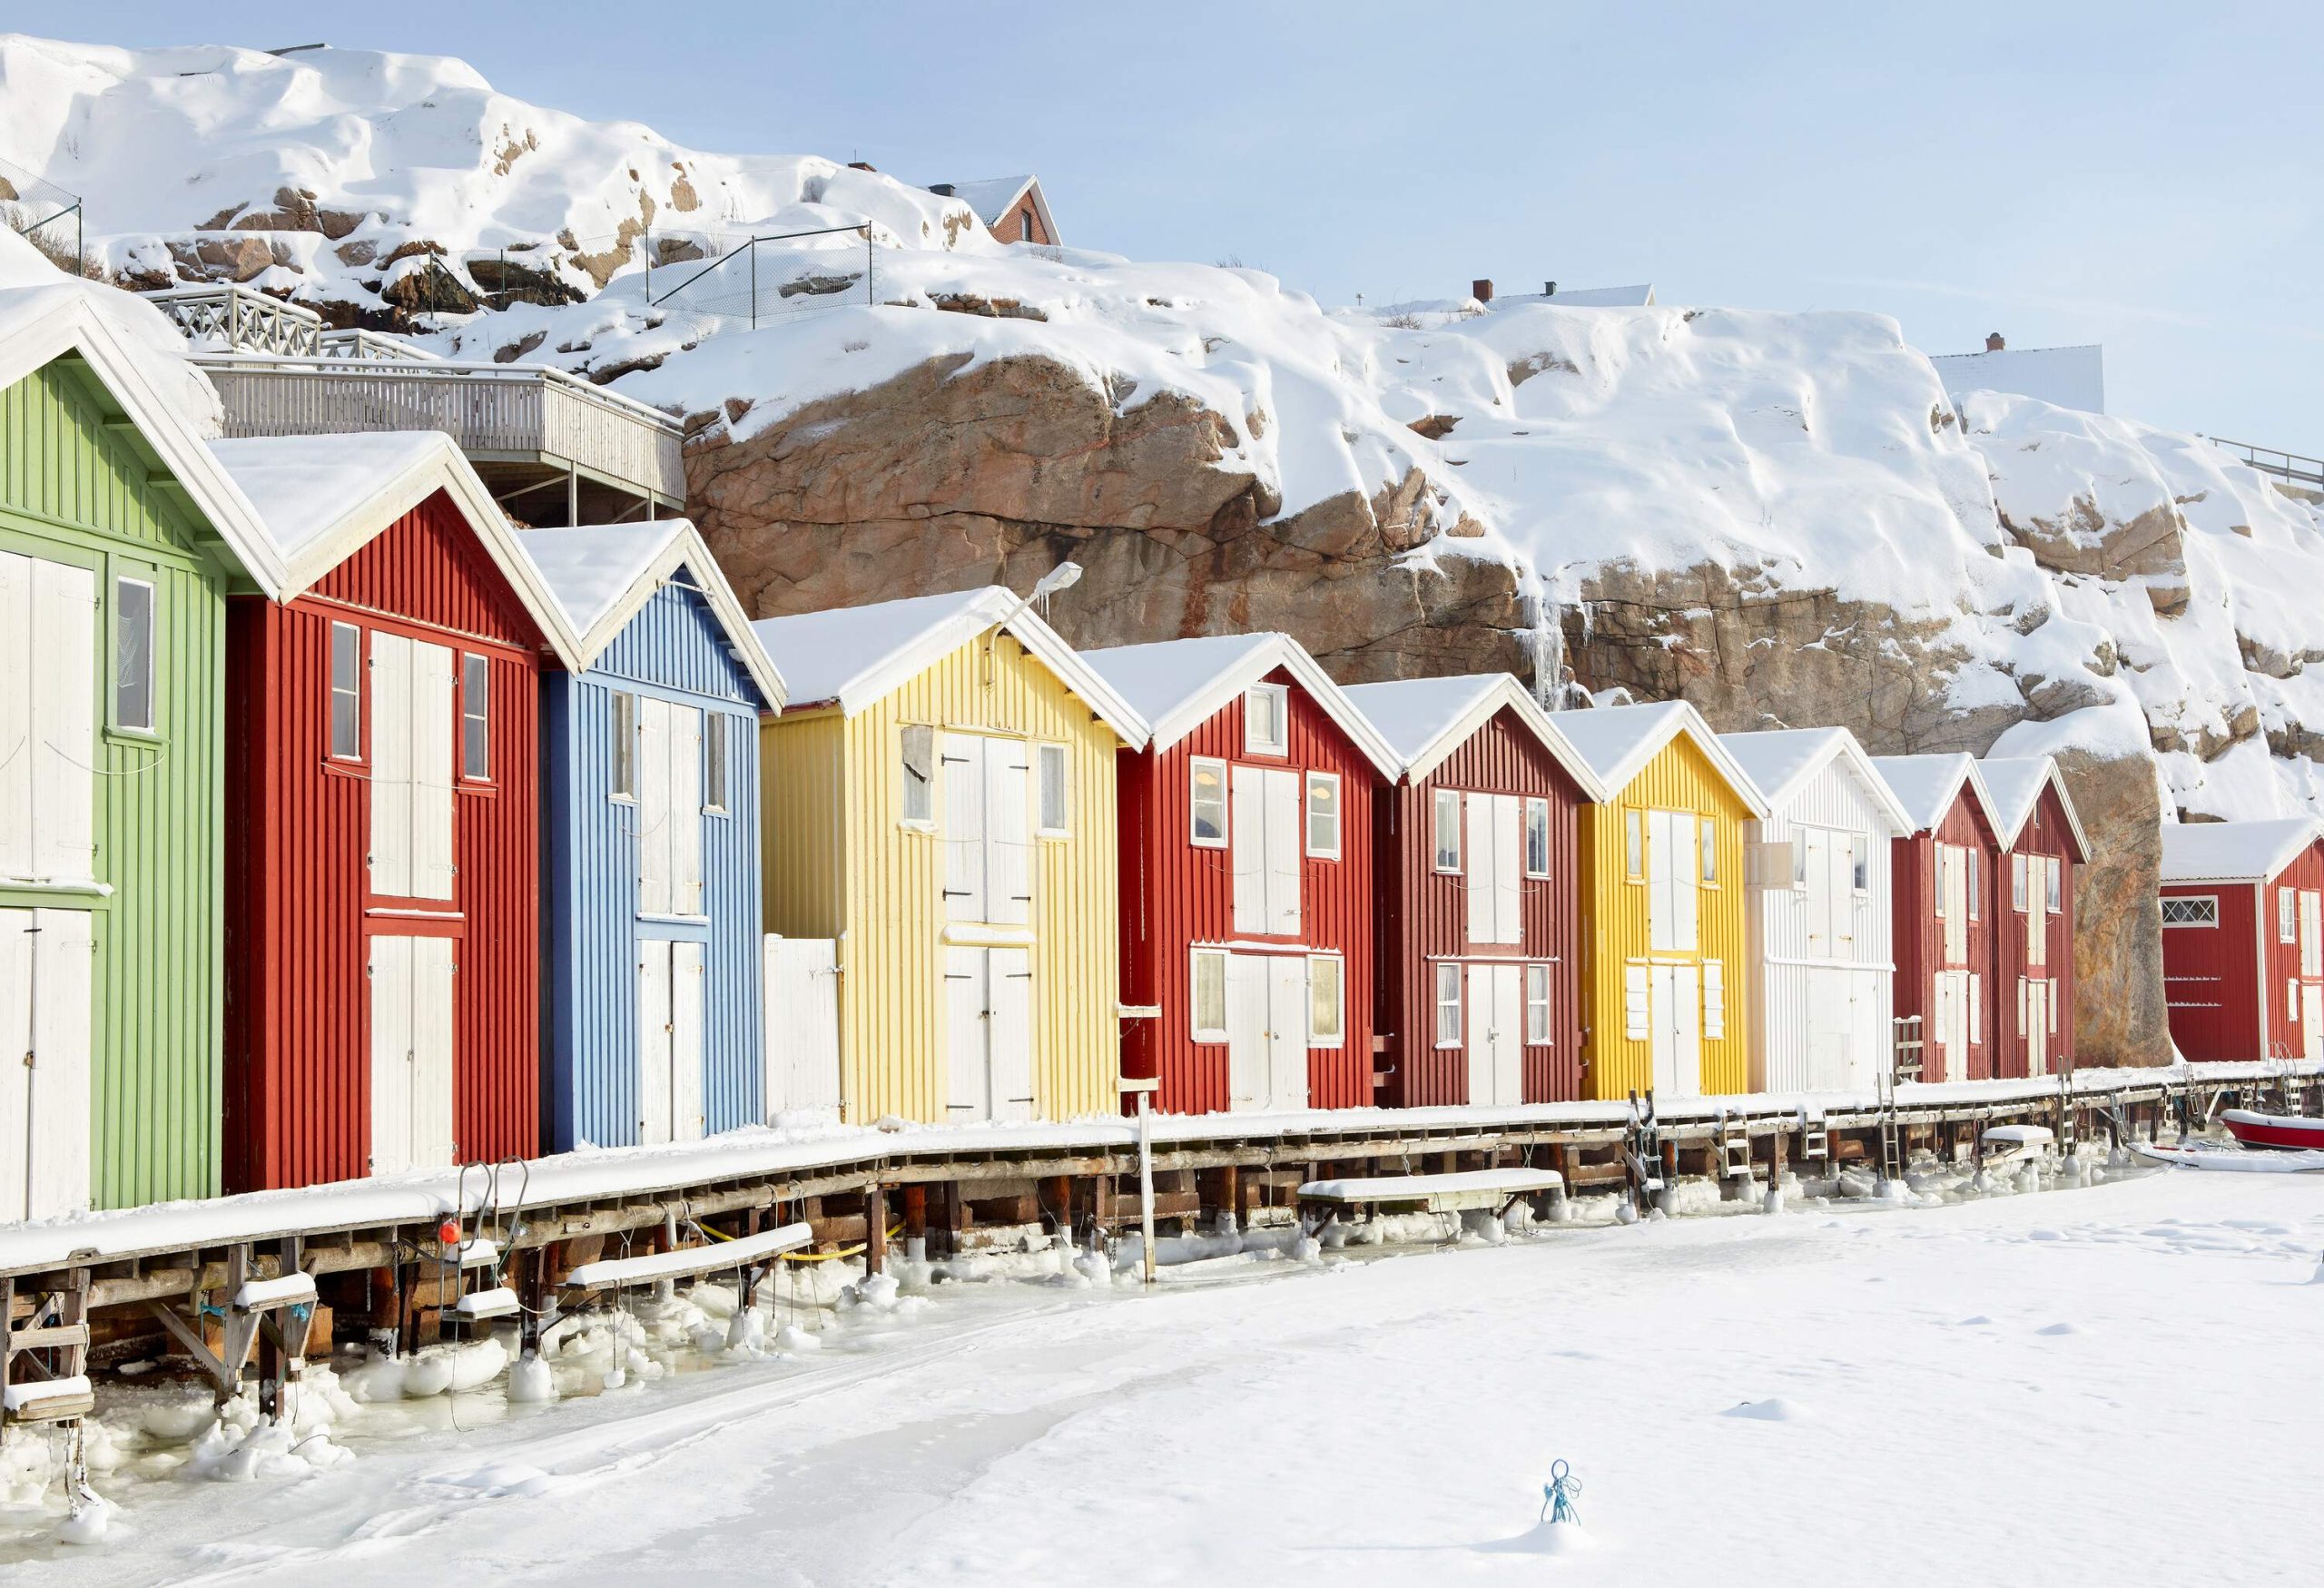 Row of colourful fishing cabins with hills covered with snow in the background.